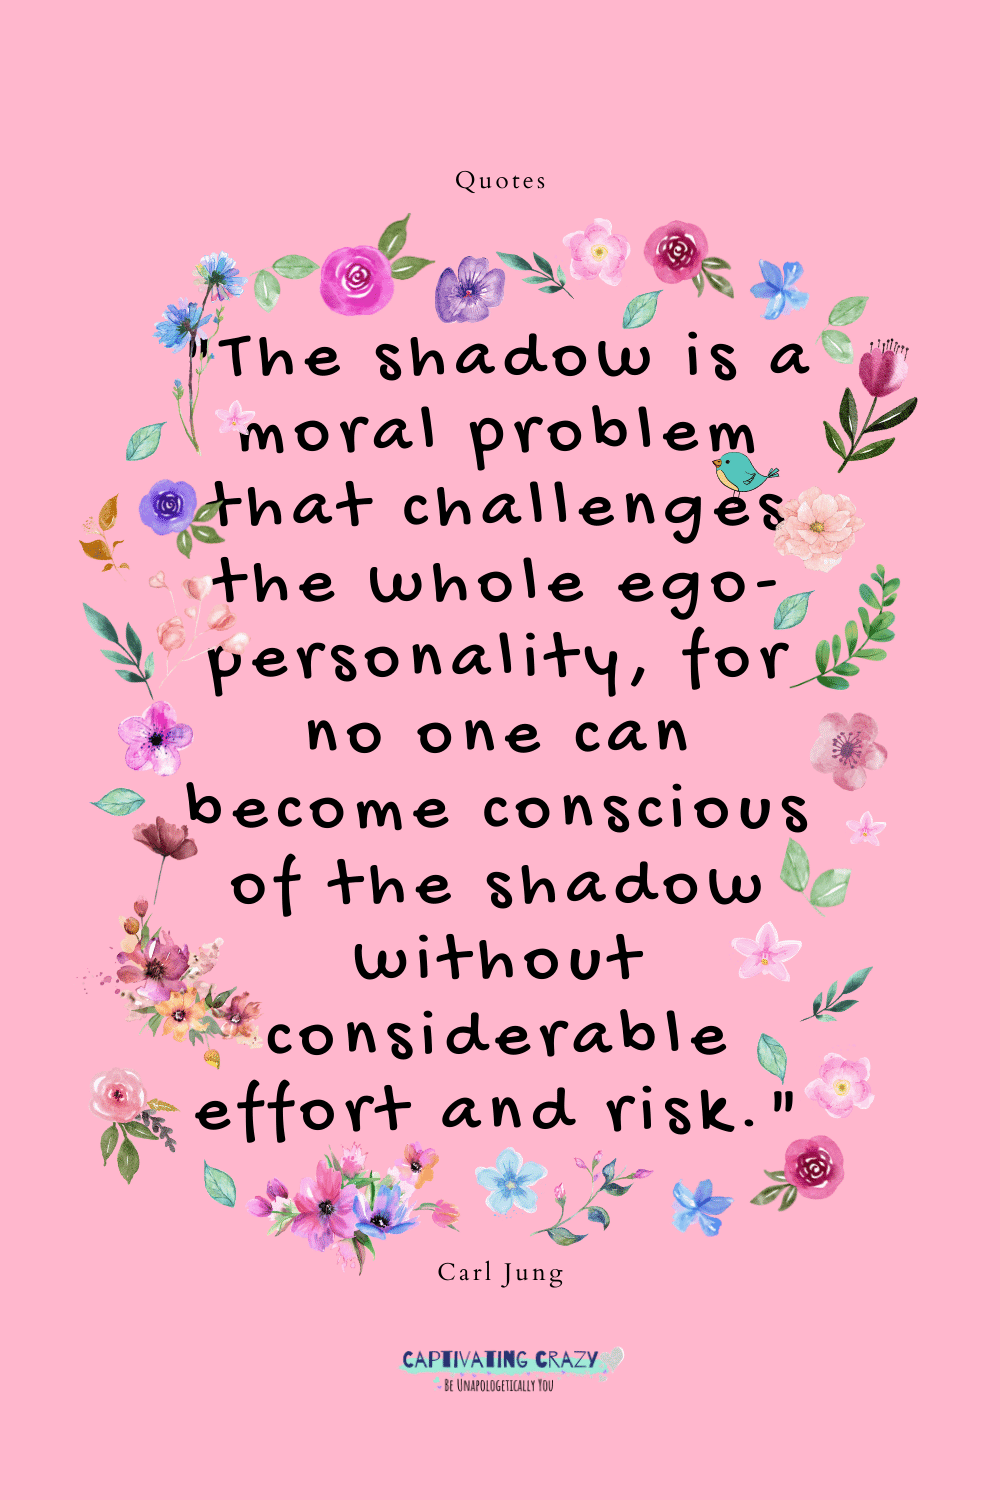 "The shadow is a moral problem that challenges the whole ego-personality, for no one can become conscious of the shadow without considerable effort and risk." -Carl Jung